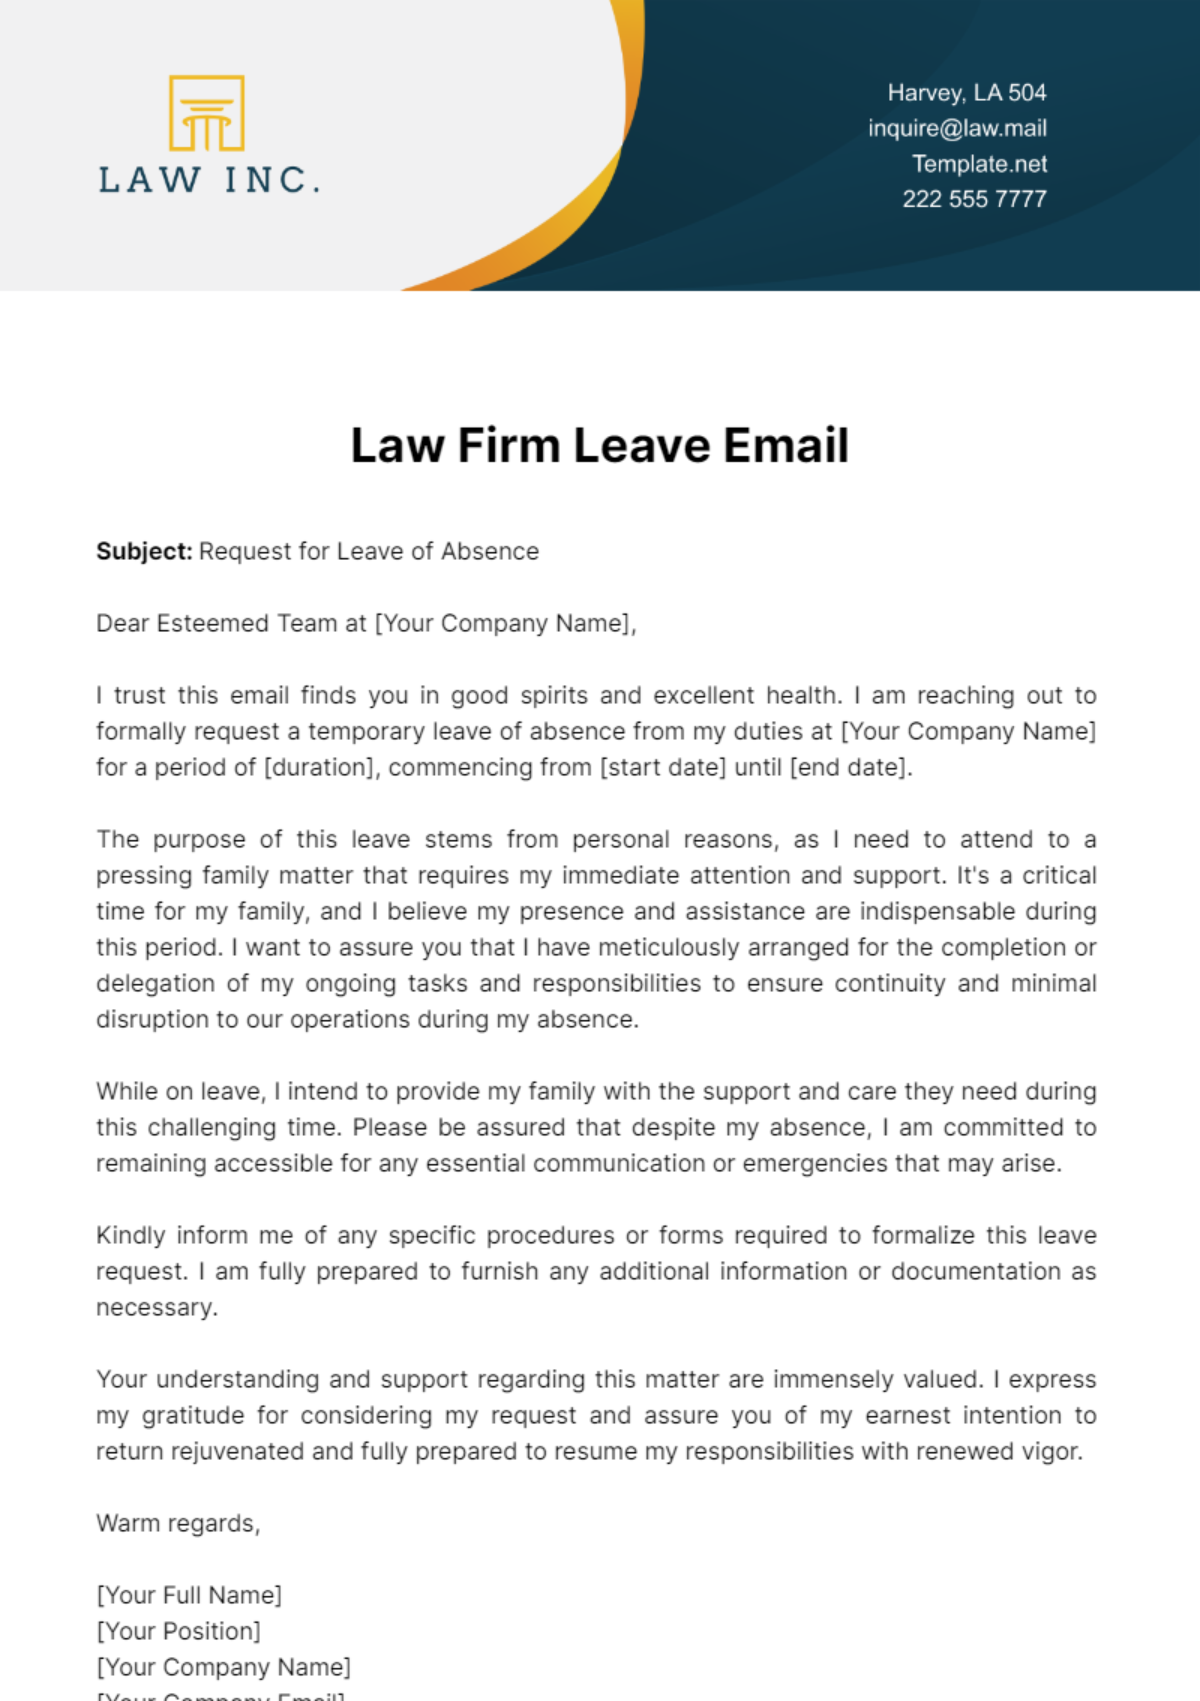 Law Firm Leave Email Template